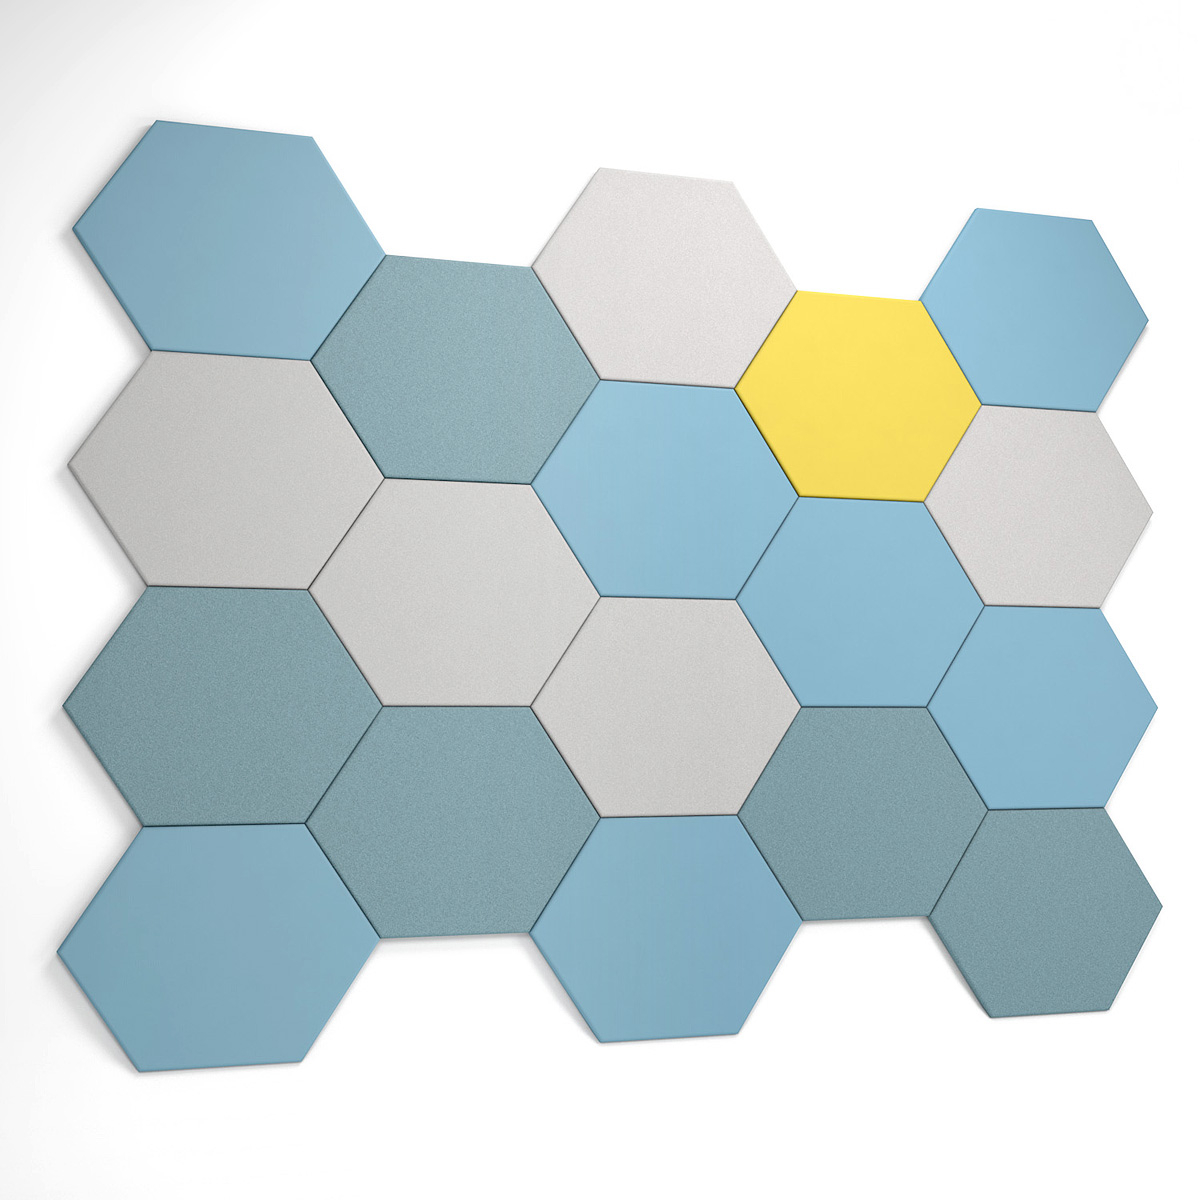 ZENARTRO™ Diamond Shape Wall Panelling Has Highly Effective Sound Absorbing Qualities 